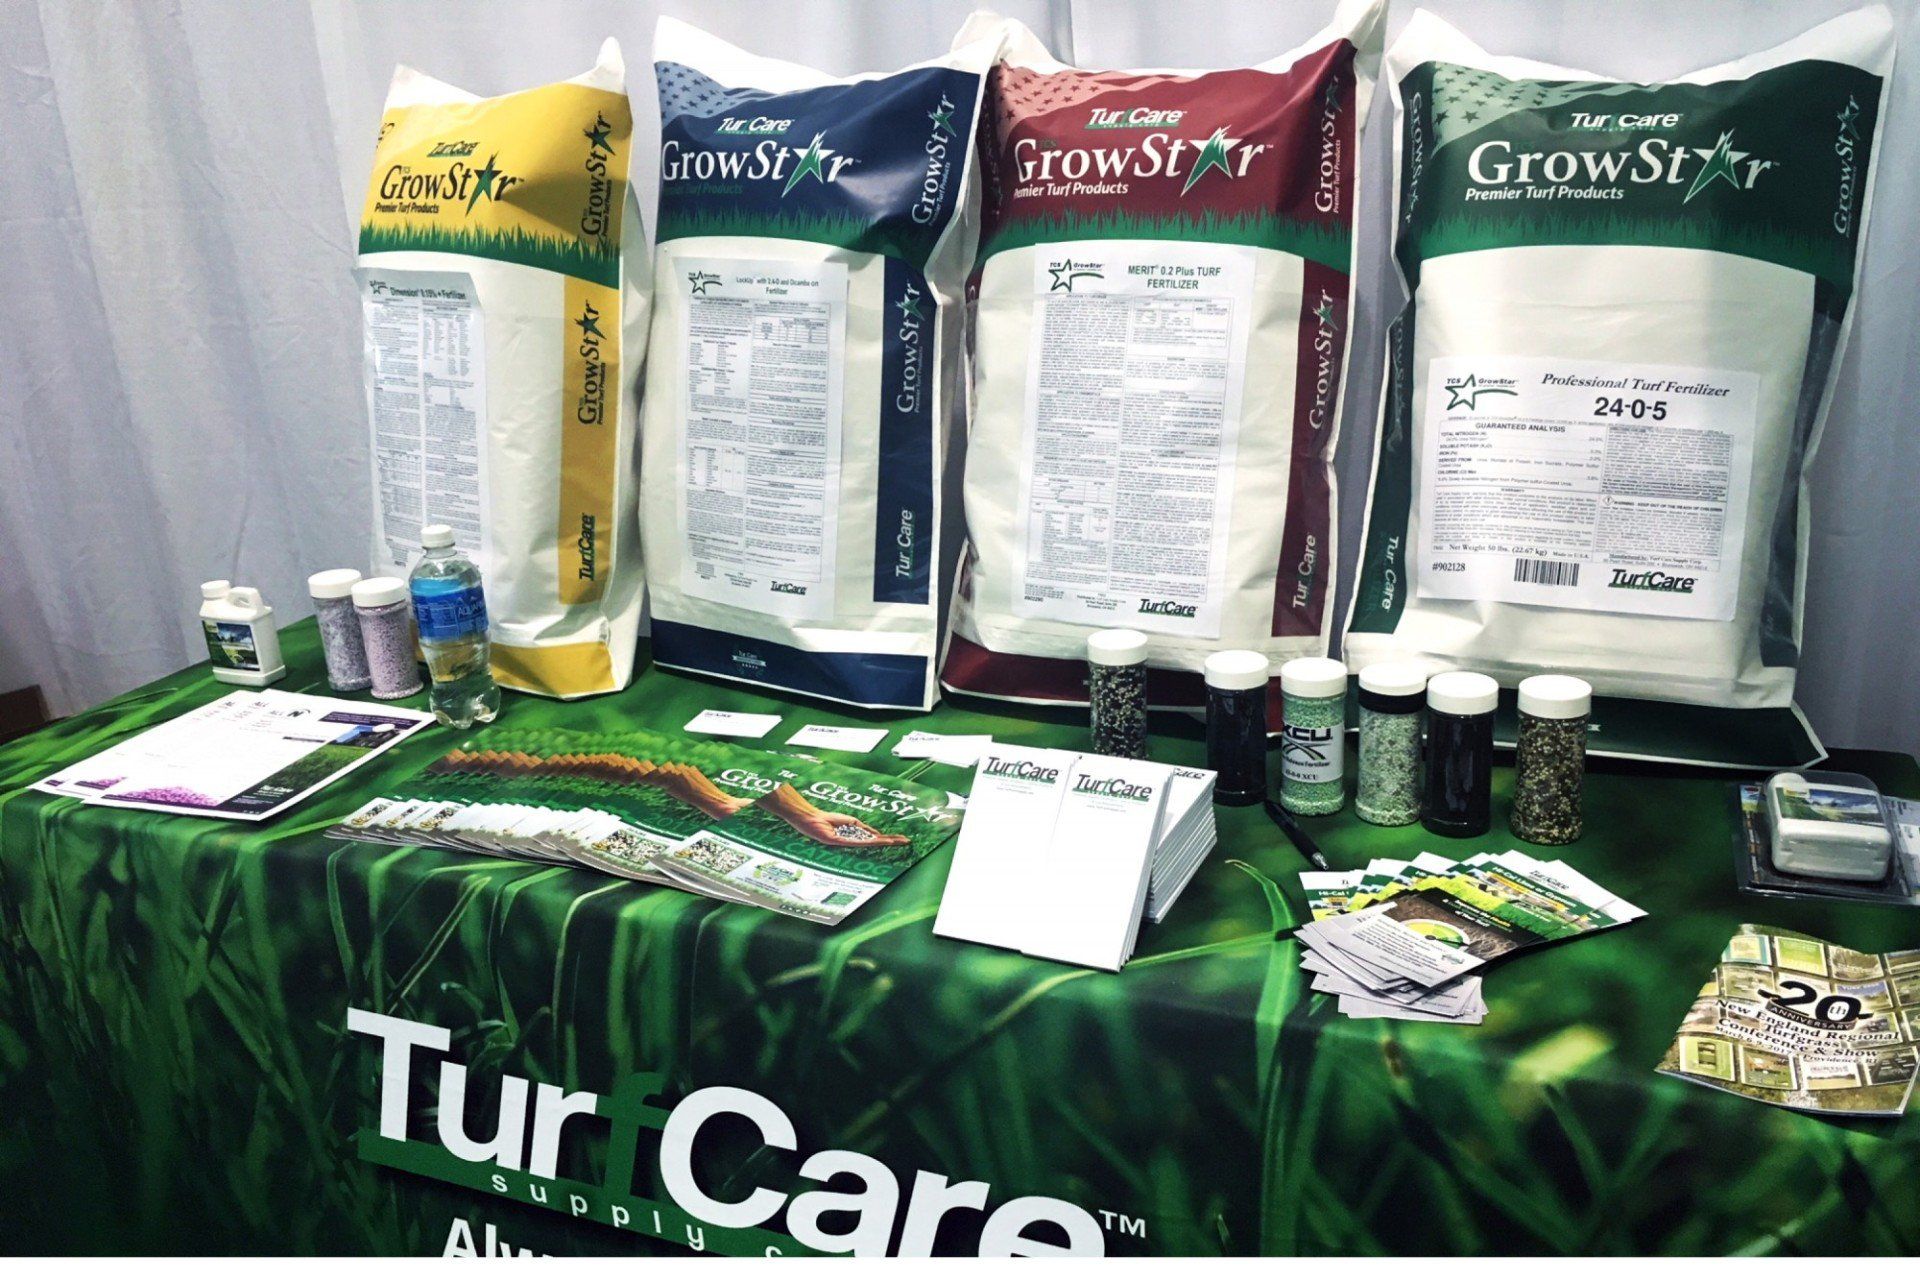 new england growstar line products